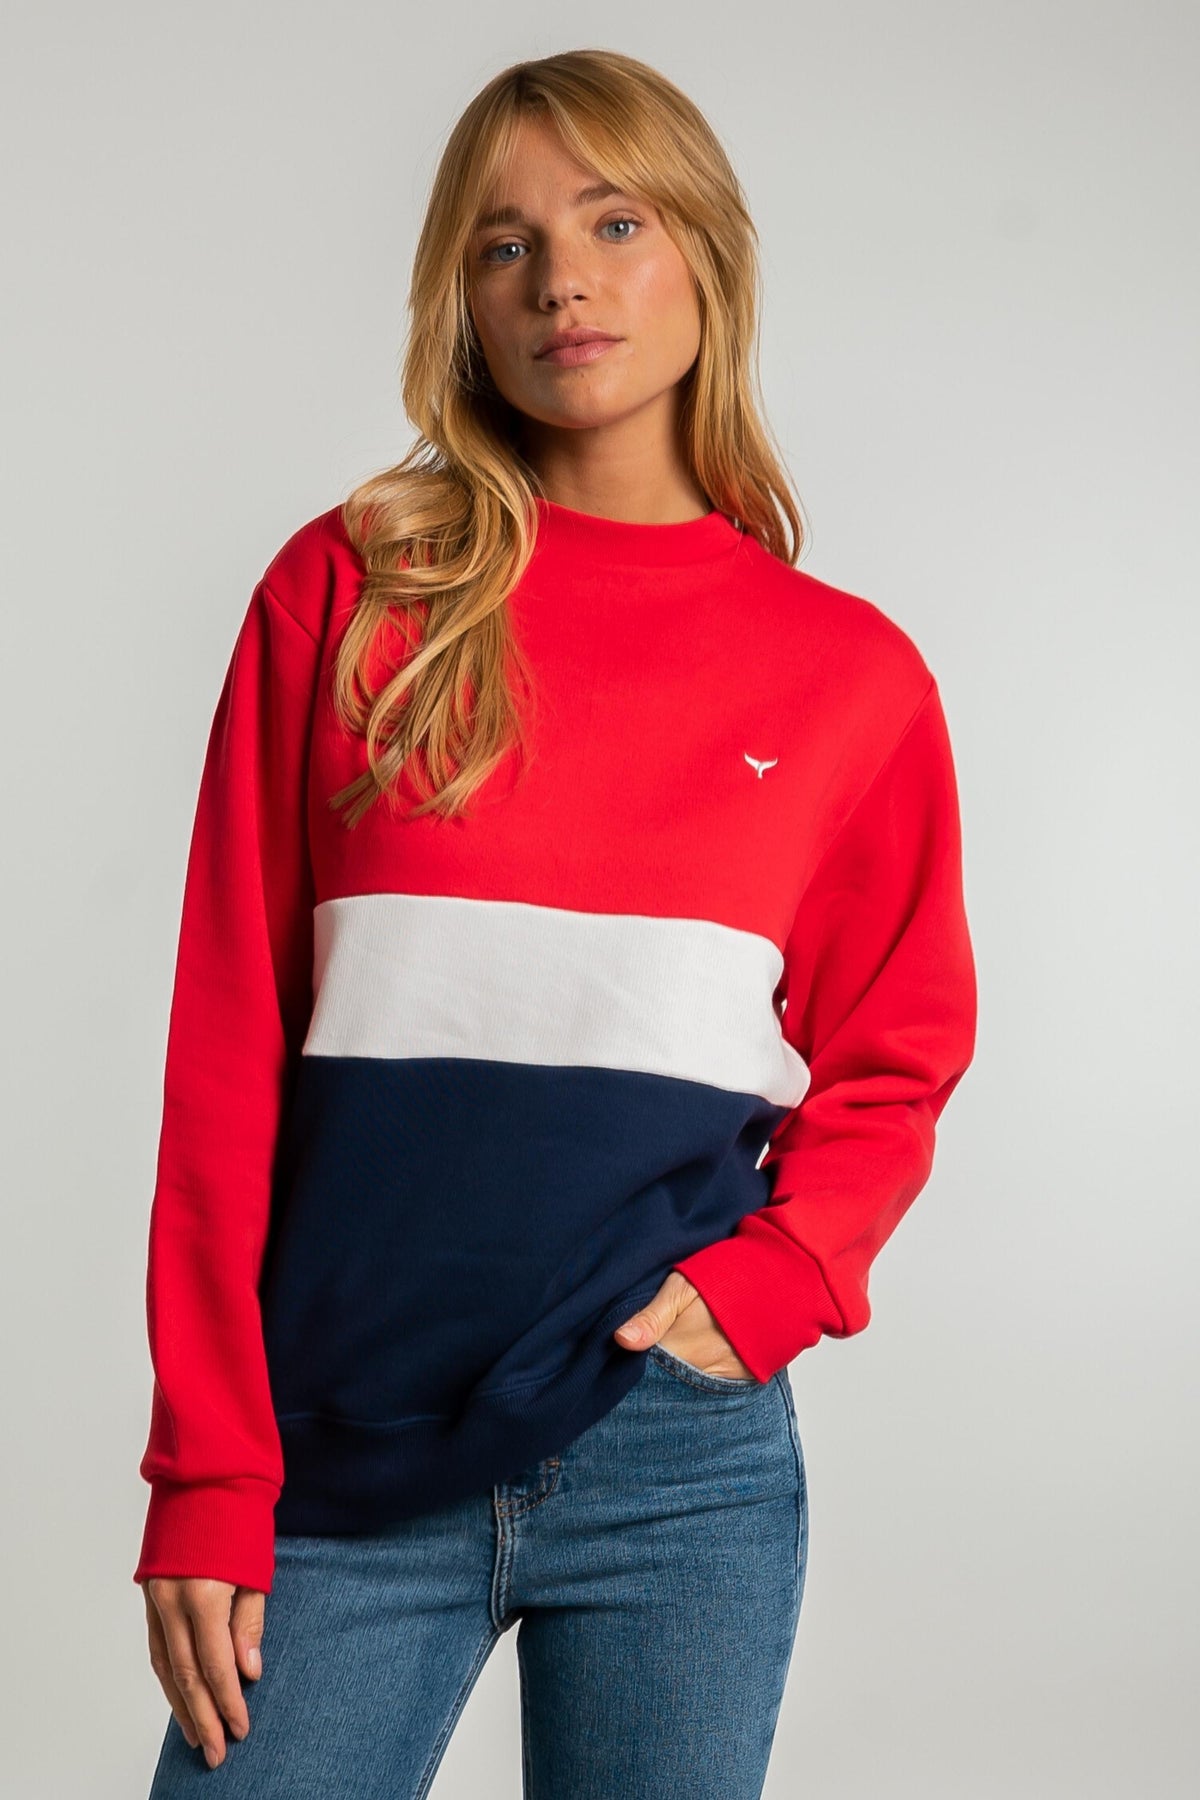 Atlantic Unisex Sweatshirt - Red - Whale Of A Time Clothing